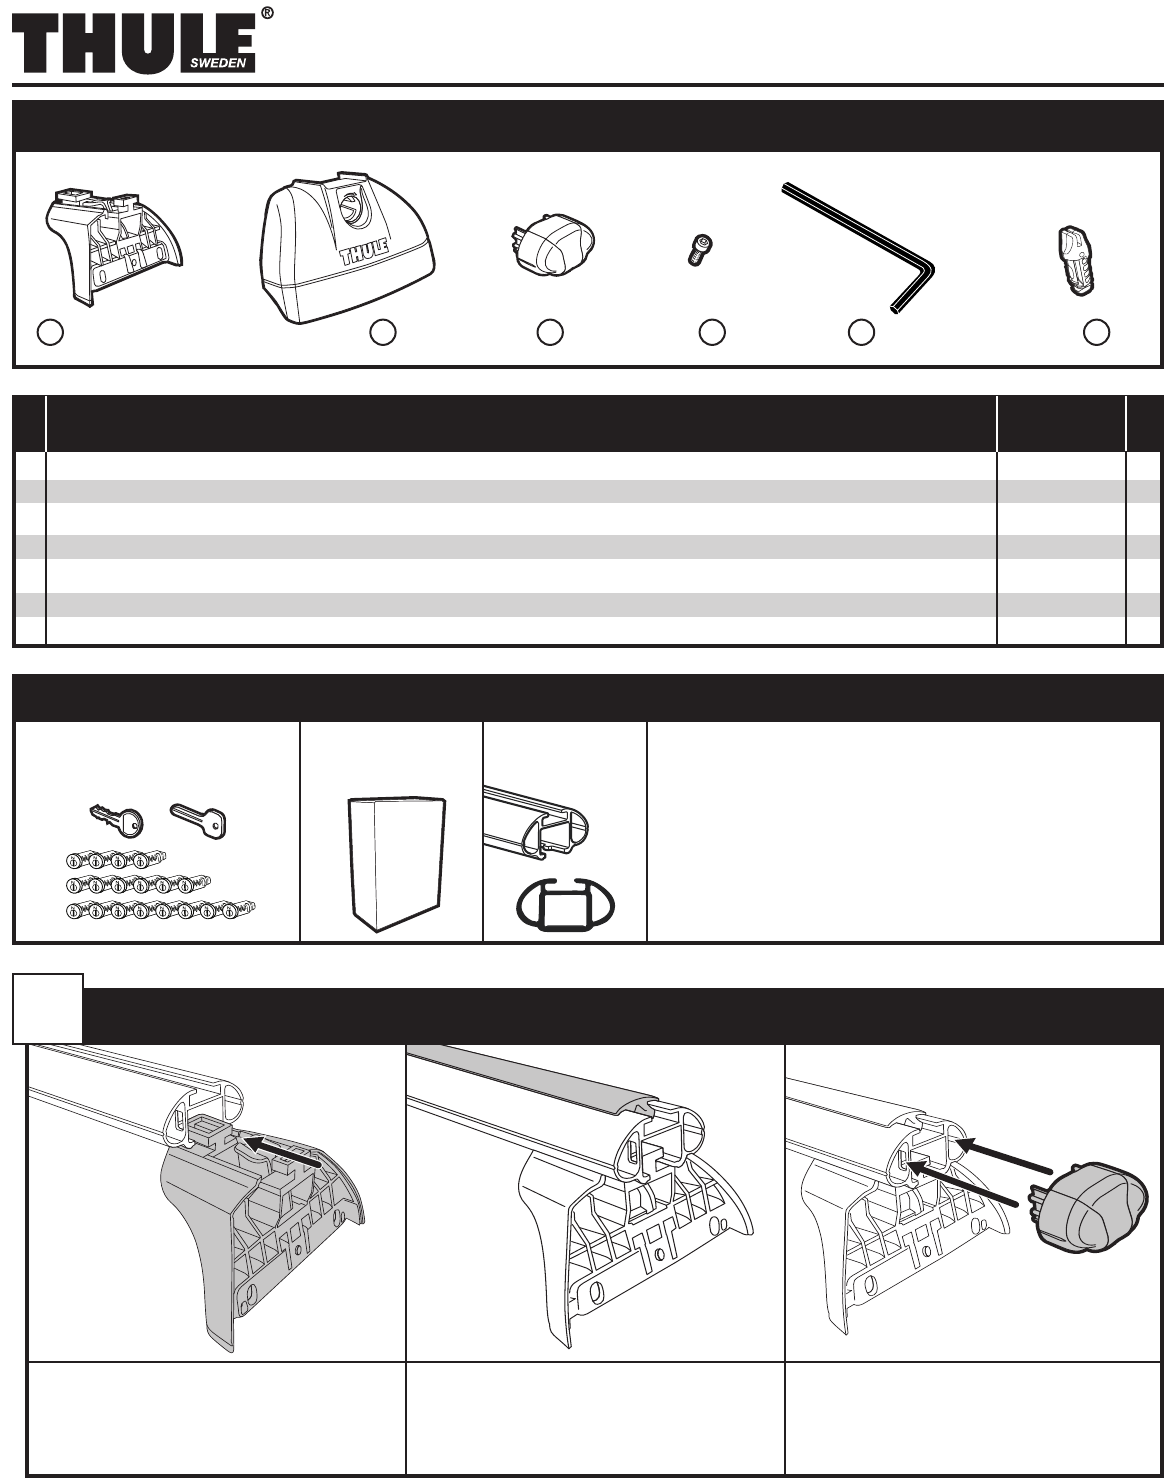 Thule Roof Rack Fit Information 460r Installation Instructions